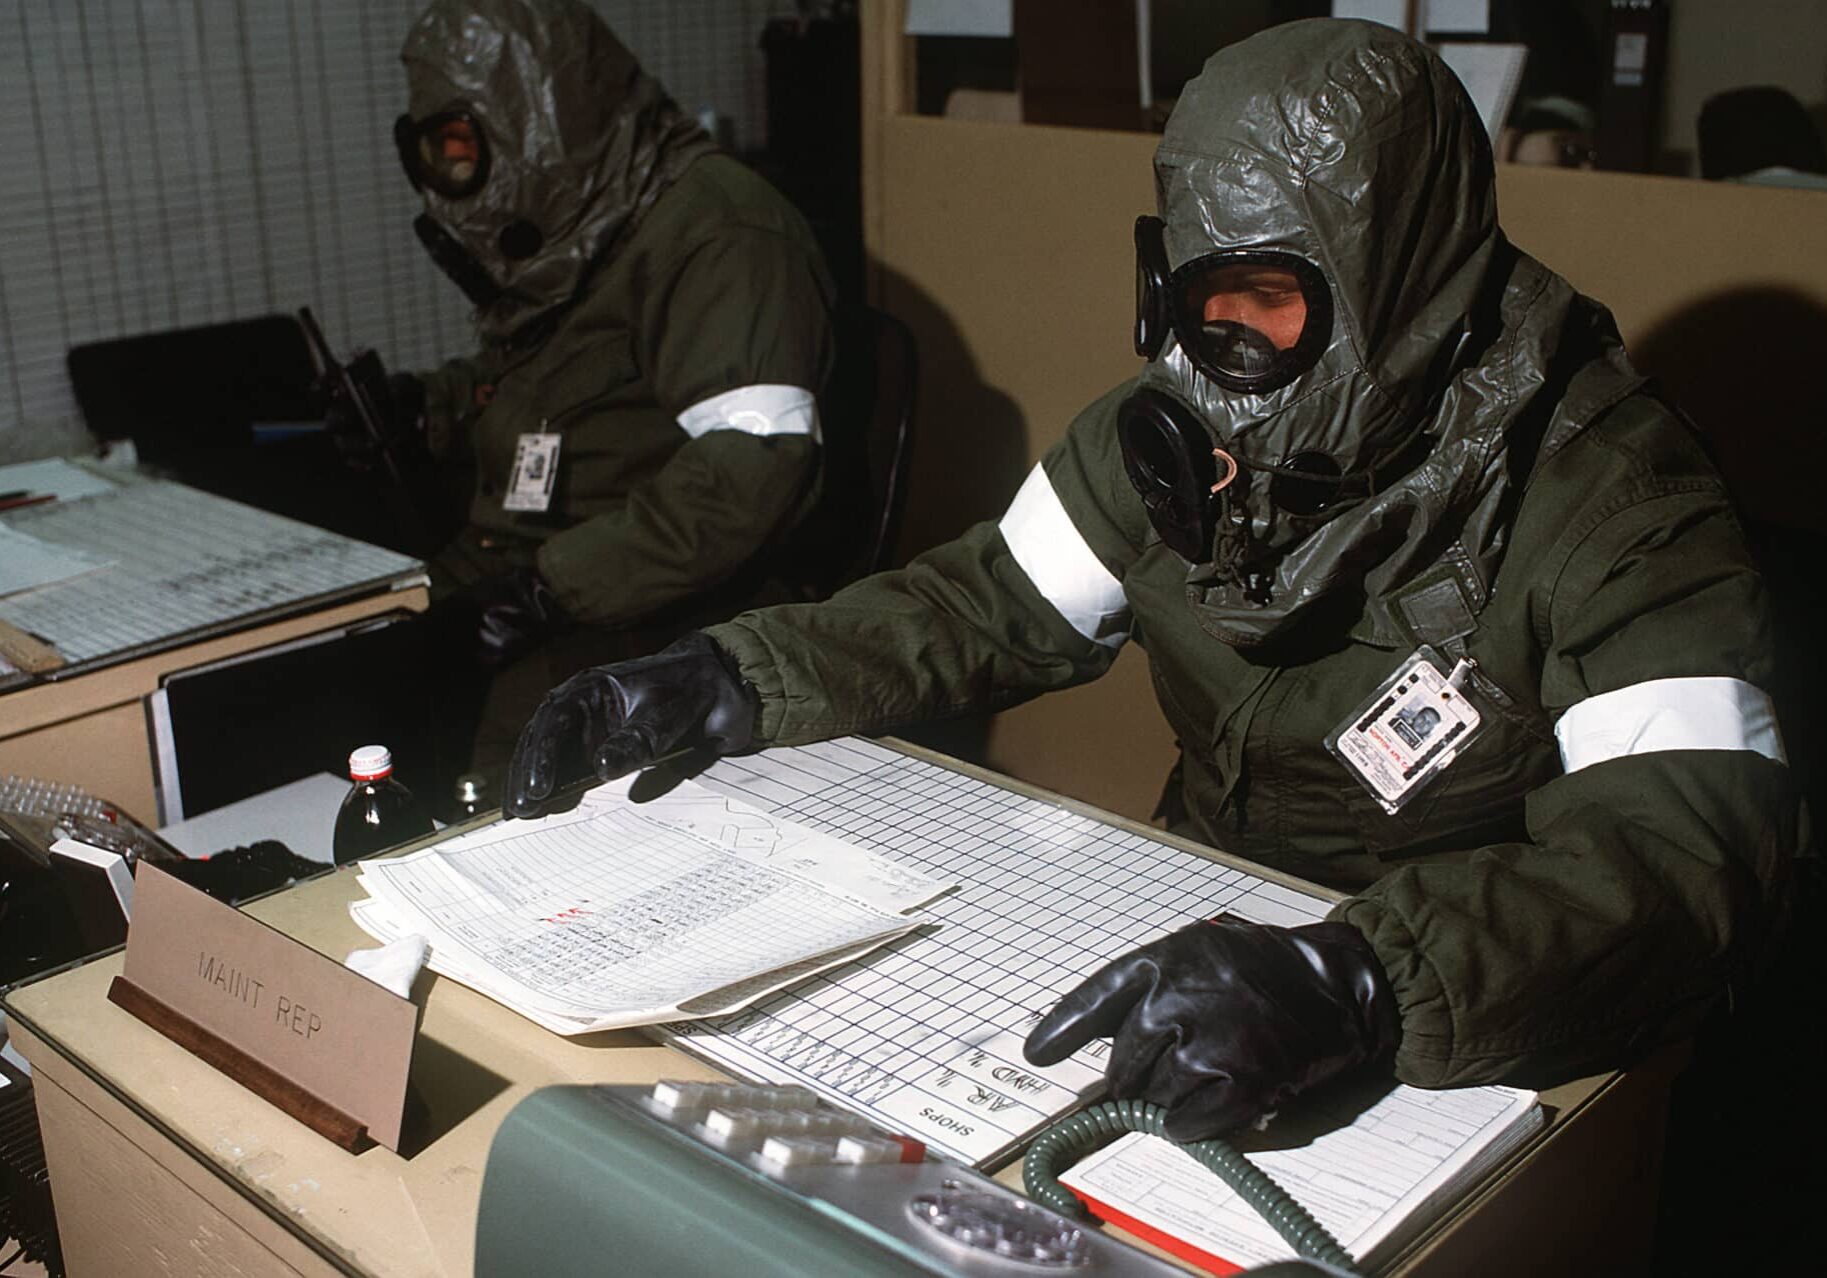 Members of the US military  wear chemical/biological warfare suits in an exercise that simulates a deployment to South Korea following an attack by North Korean forces. (Department of Defense, Wikimedia Commons)